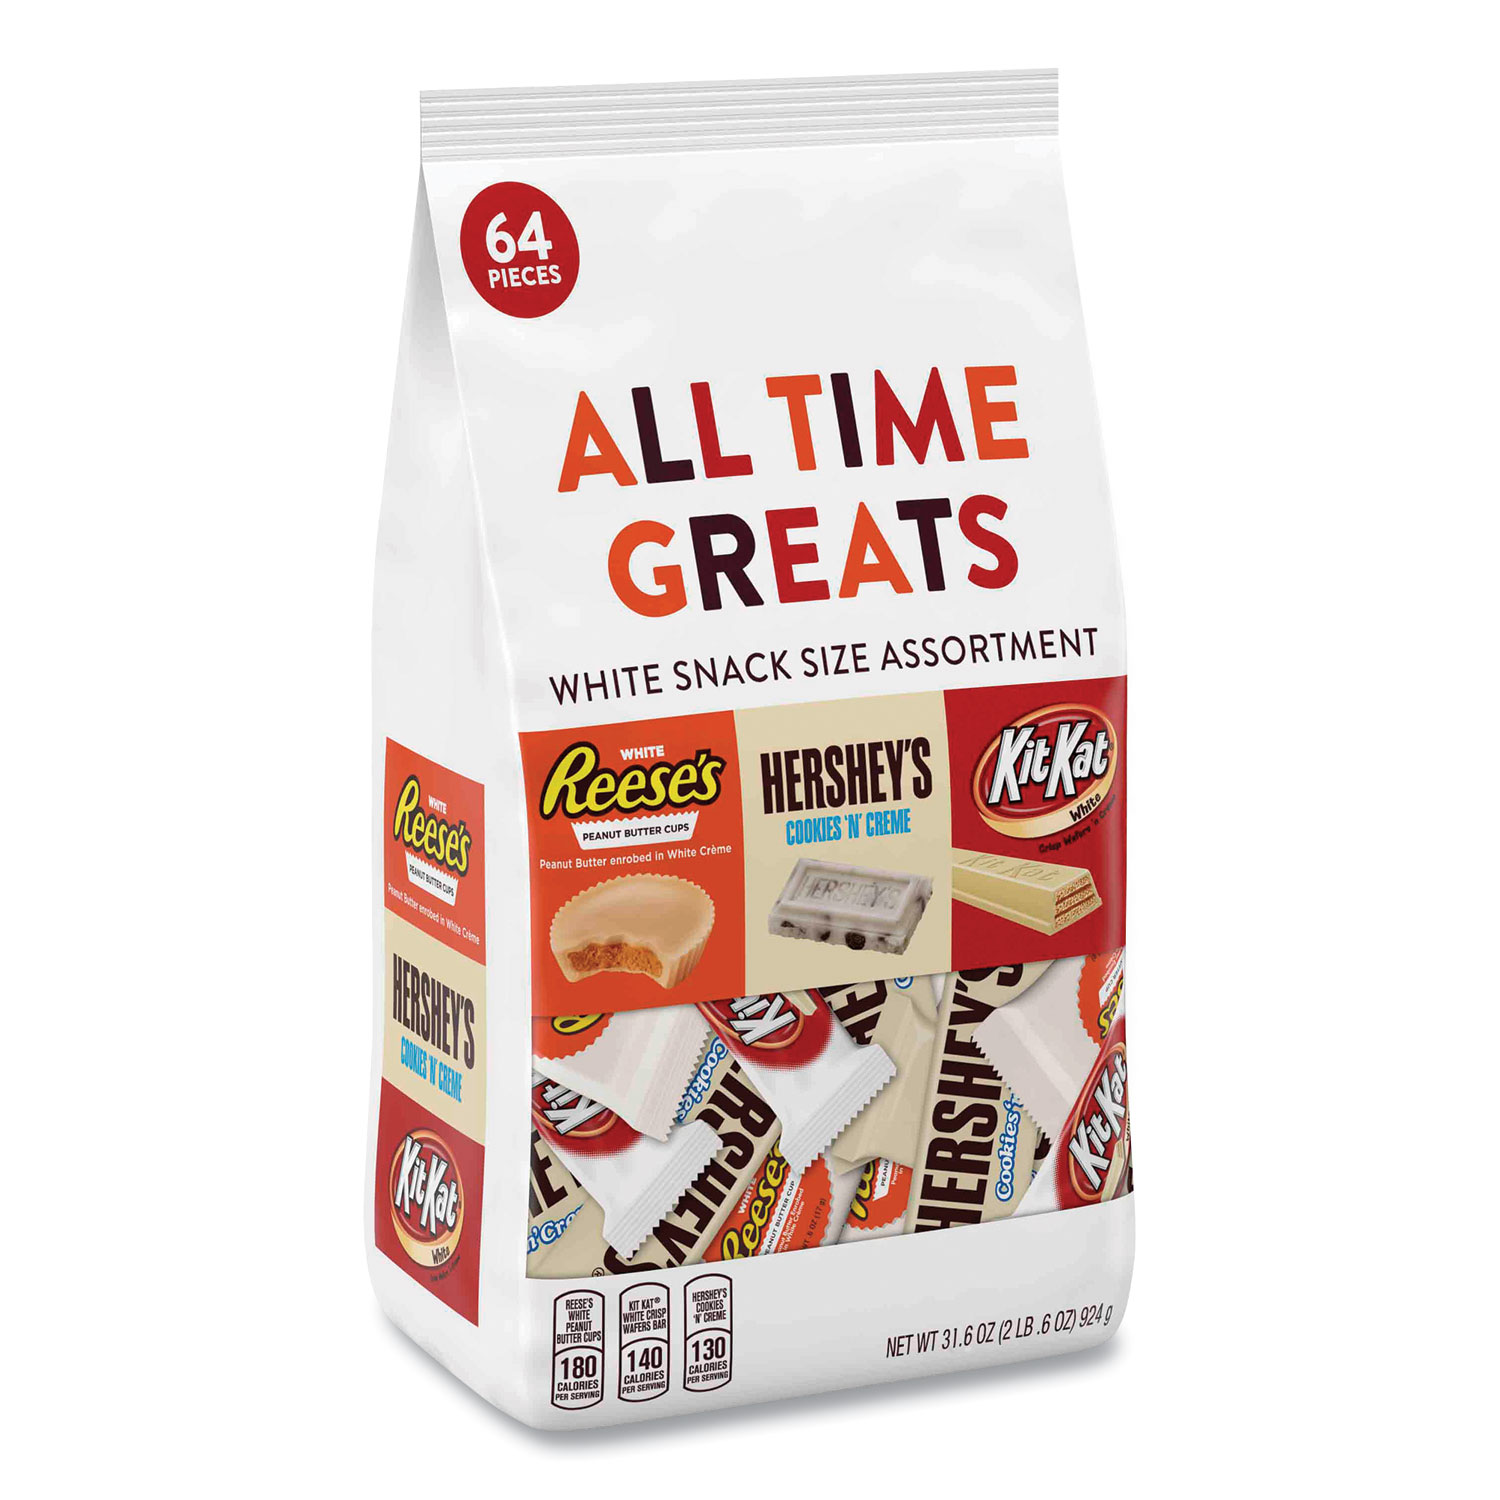  Hershey's 99392 All Time Greats White Variety Pack, Assorted, 32.6 oz Bag, 64 Pieces/Bag, Free Delivery in 1-4 Business Days (GRR24600353) 